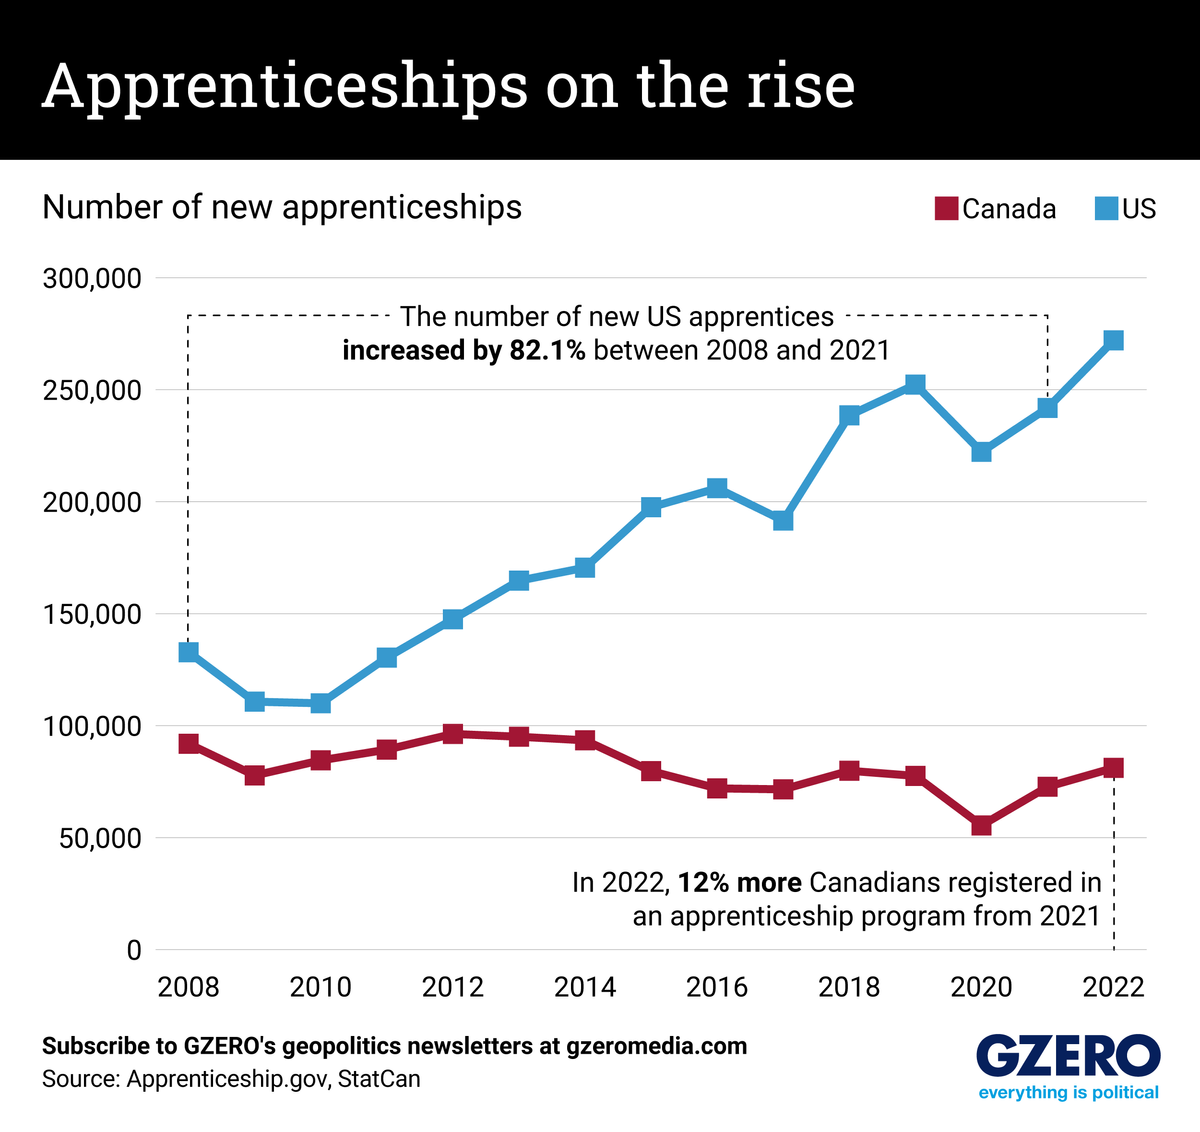 Graphic Truth: Apprenticeships are on the rise